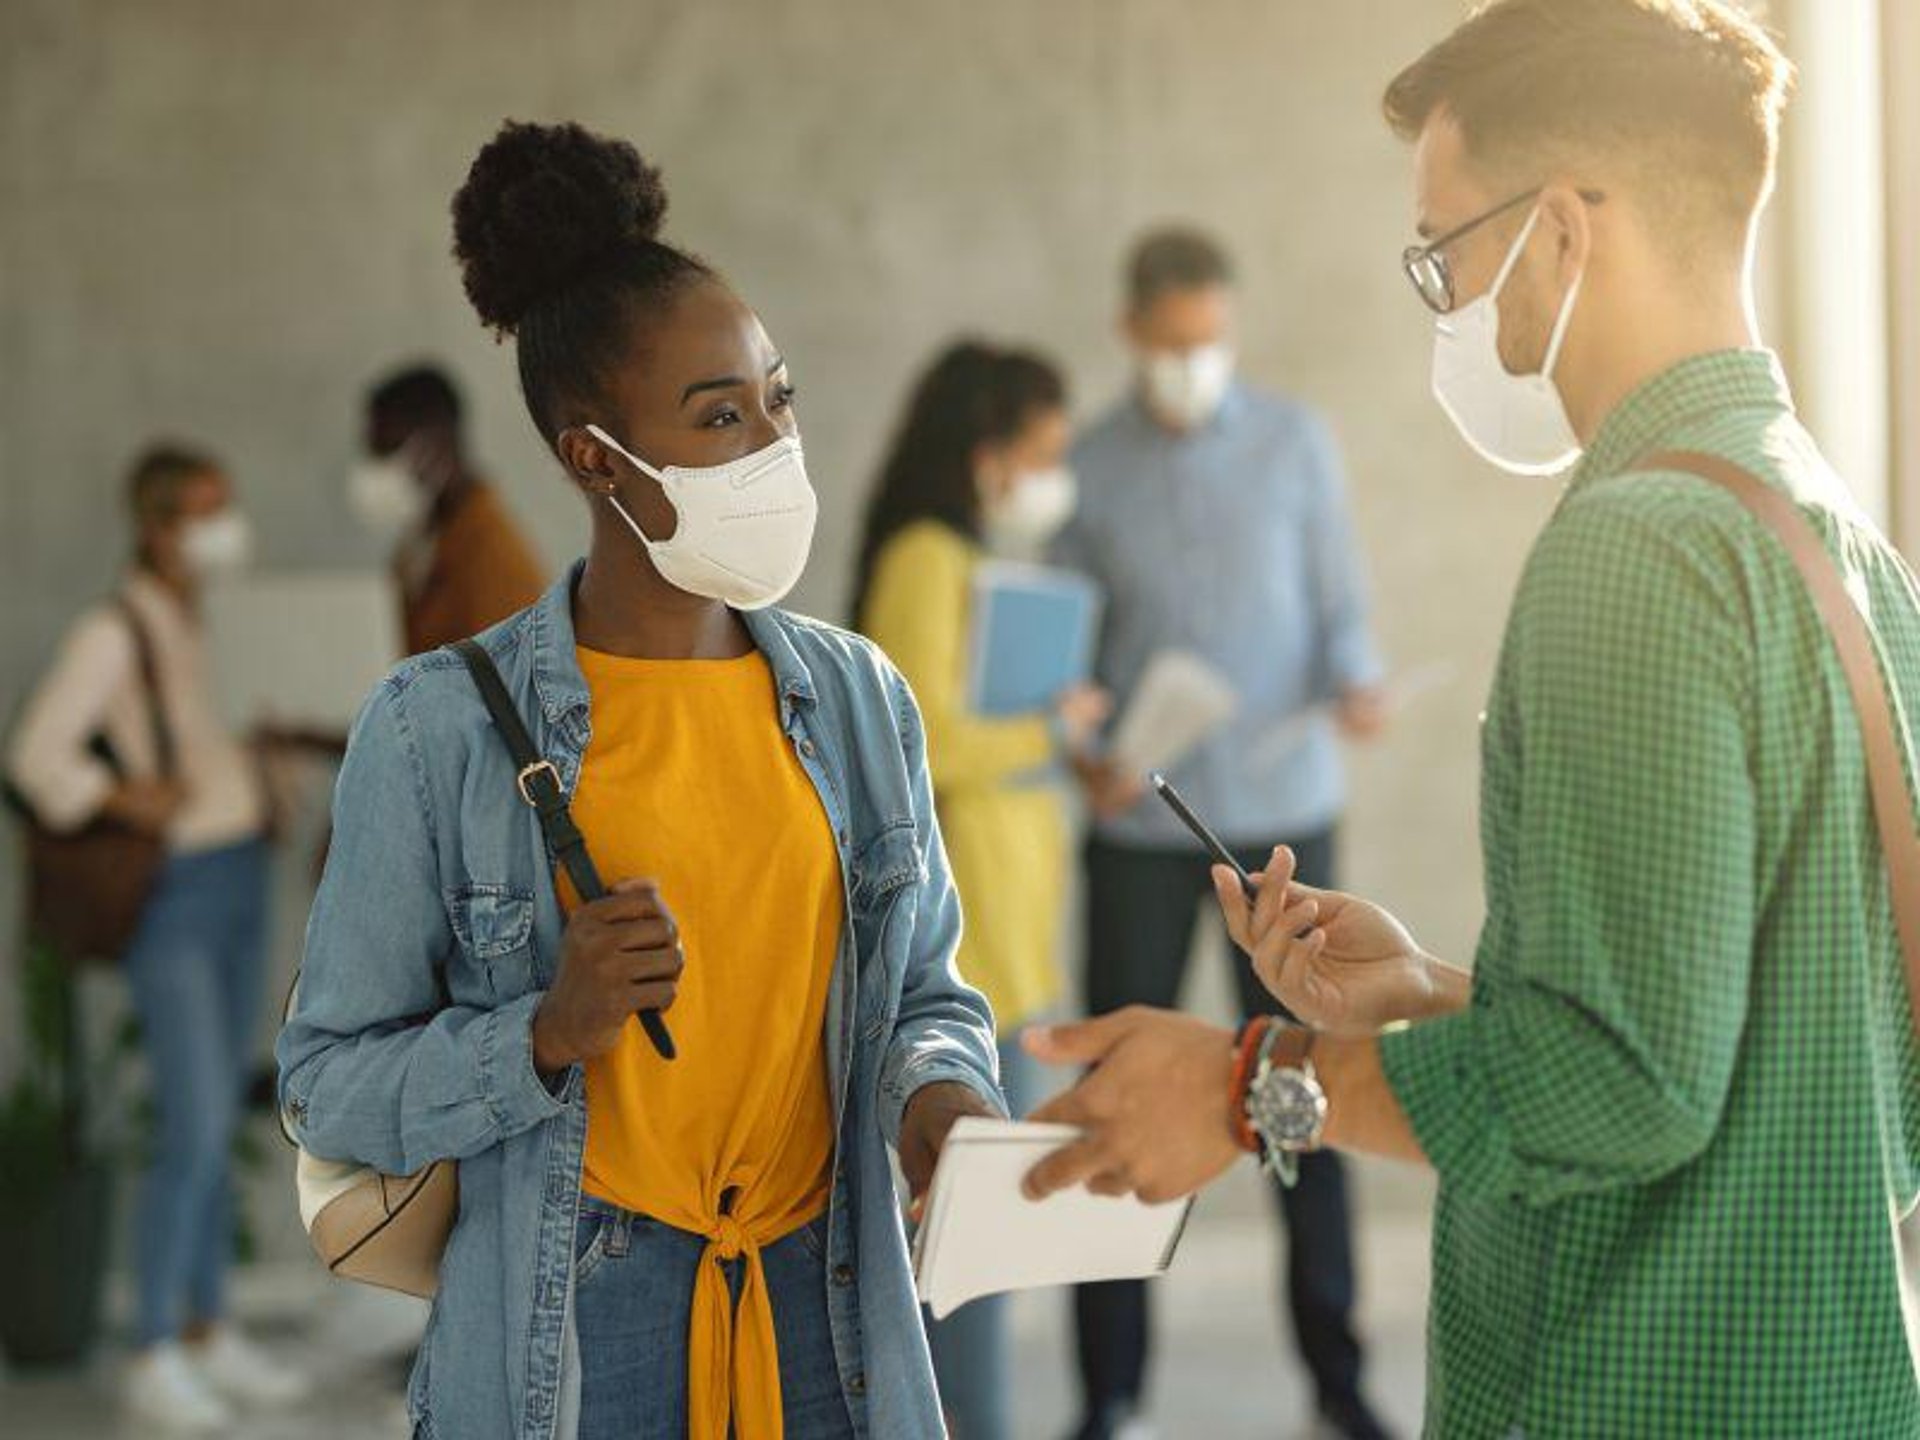 Most Americans May Keep Wearing Masks, Distancing Even After Pandemic: Survey thumbnail